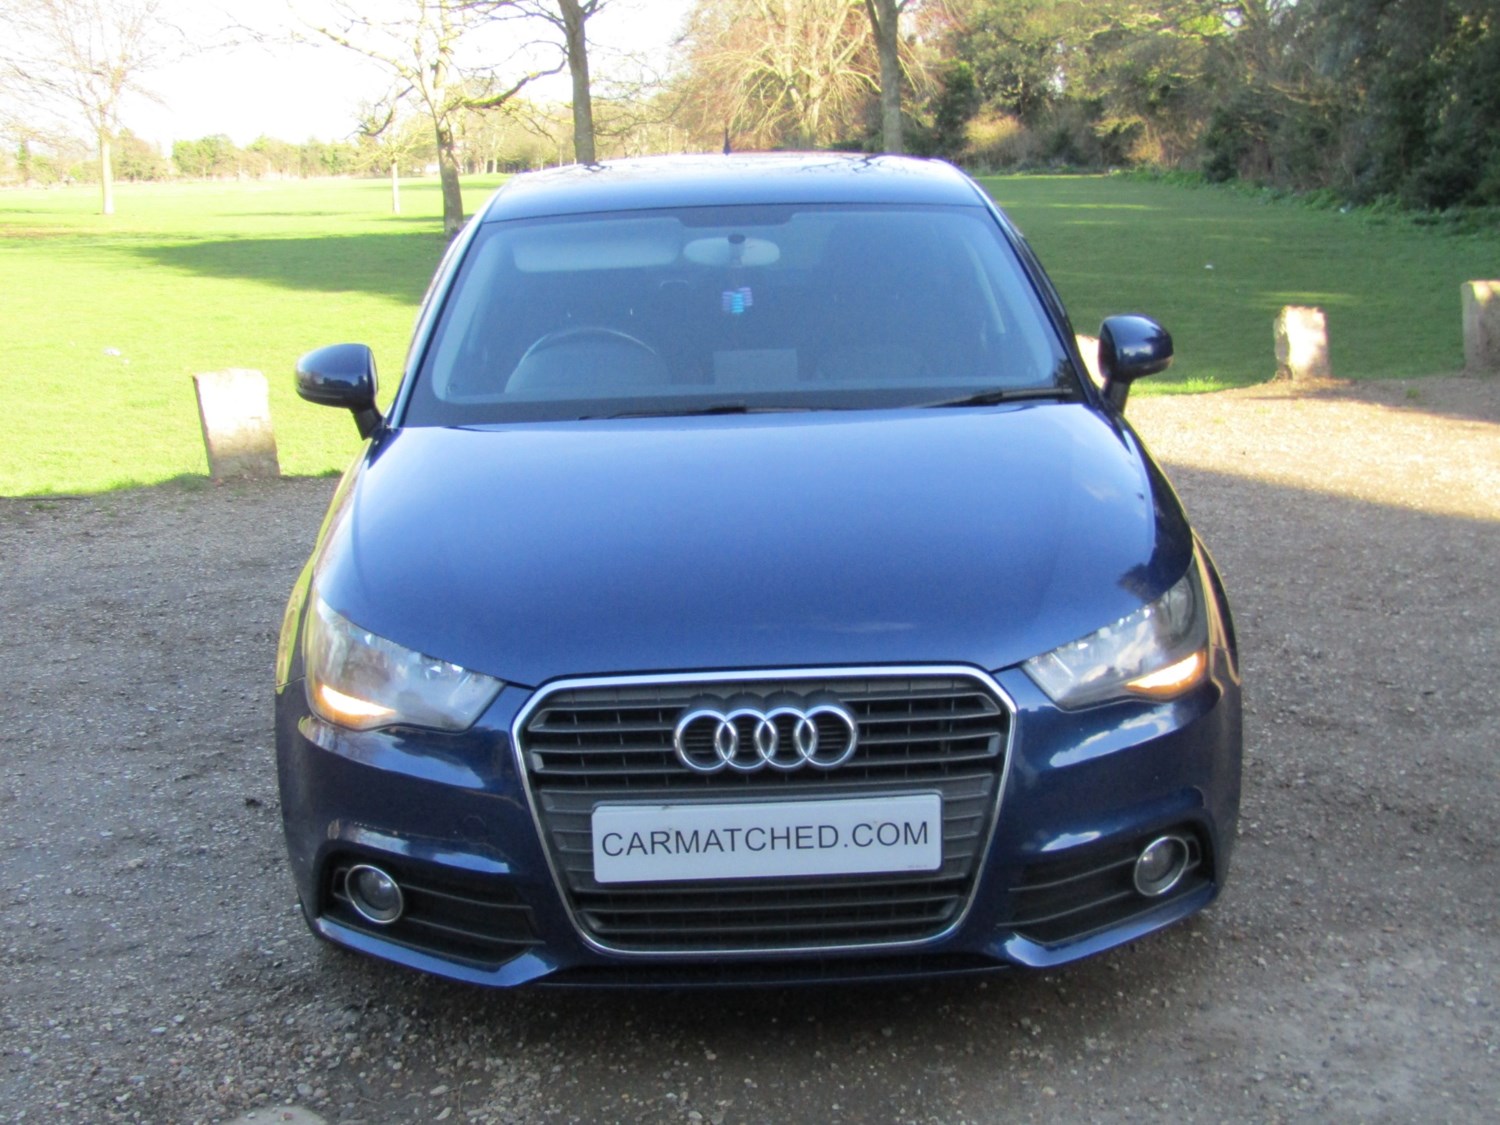 2012 (62) Audi A1 1.6 TDI Sport 5dr For Sale In Broadstairs, Kent